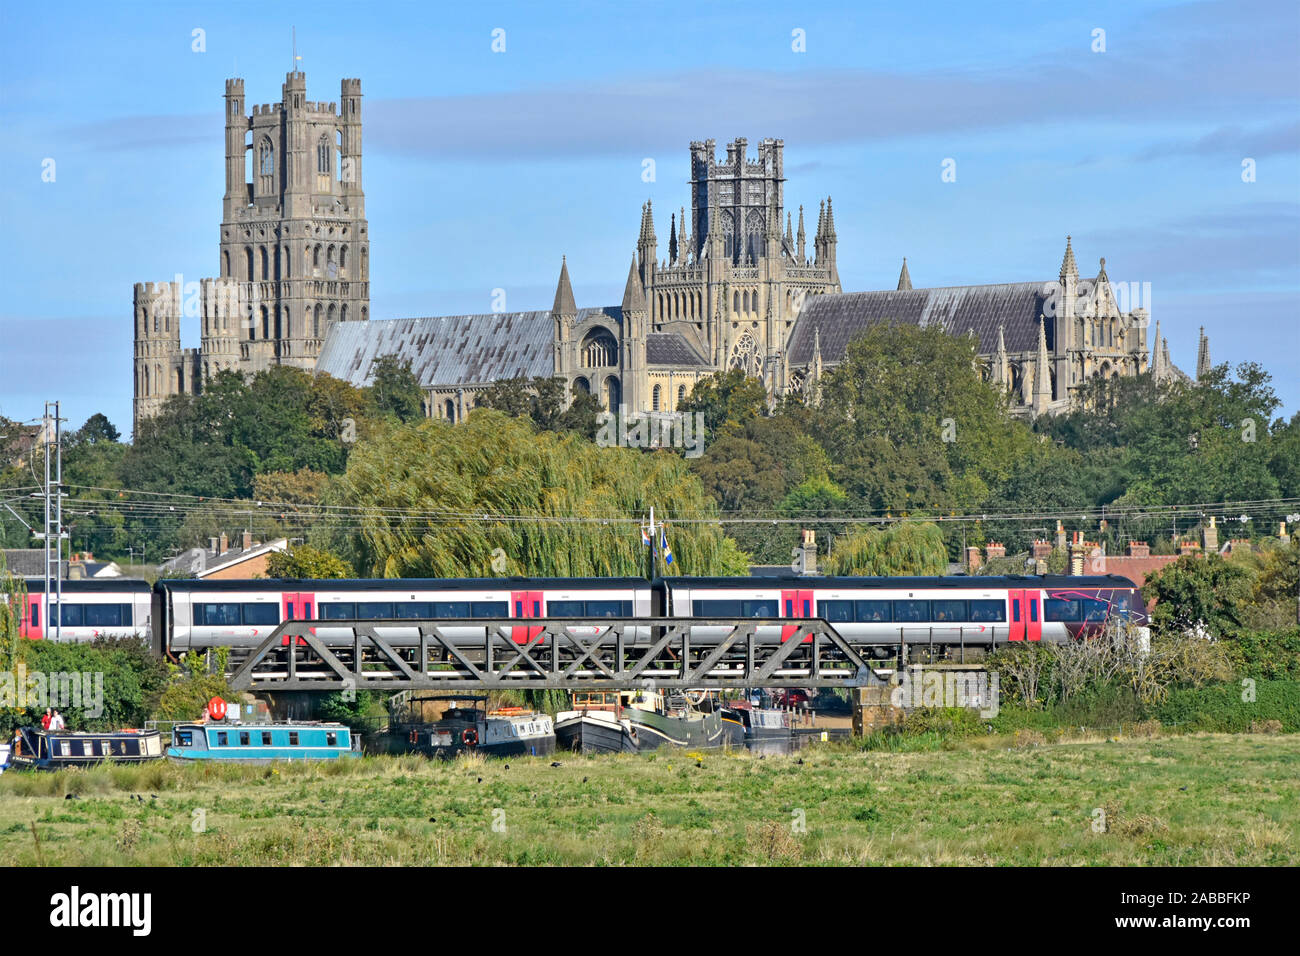 Ely Cathedral beyond train departing Ely Station Cambridgeshire boats on River Great Ouse below railway bridge  East Anglia Fens landscape England UK Stock Photo